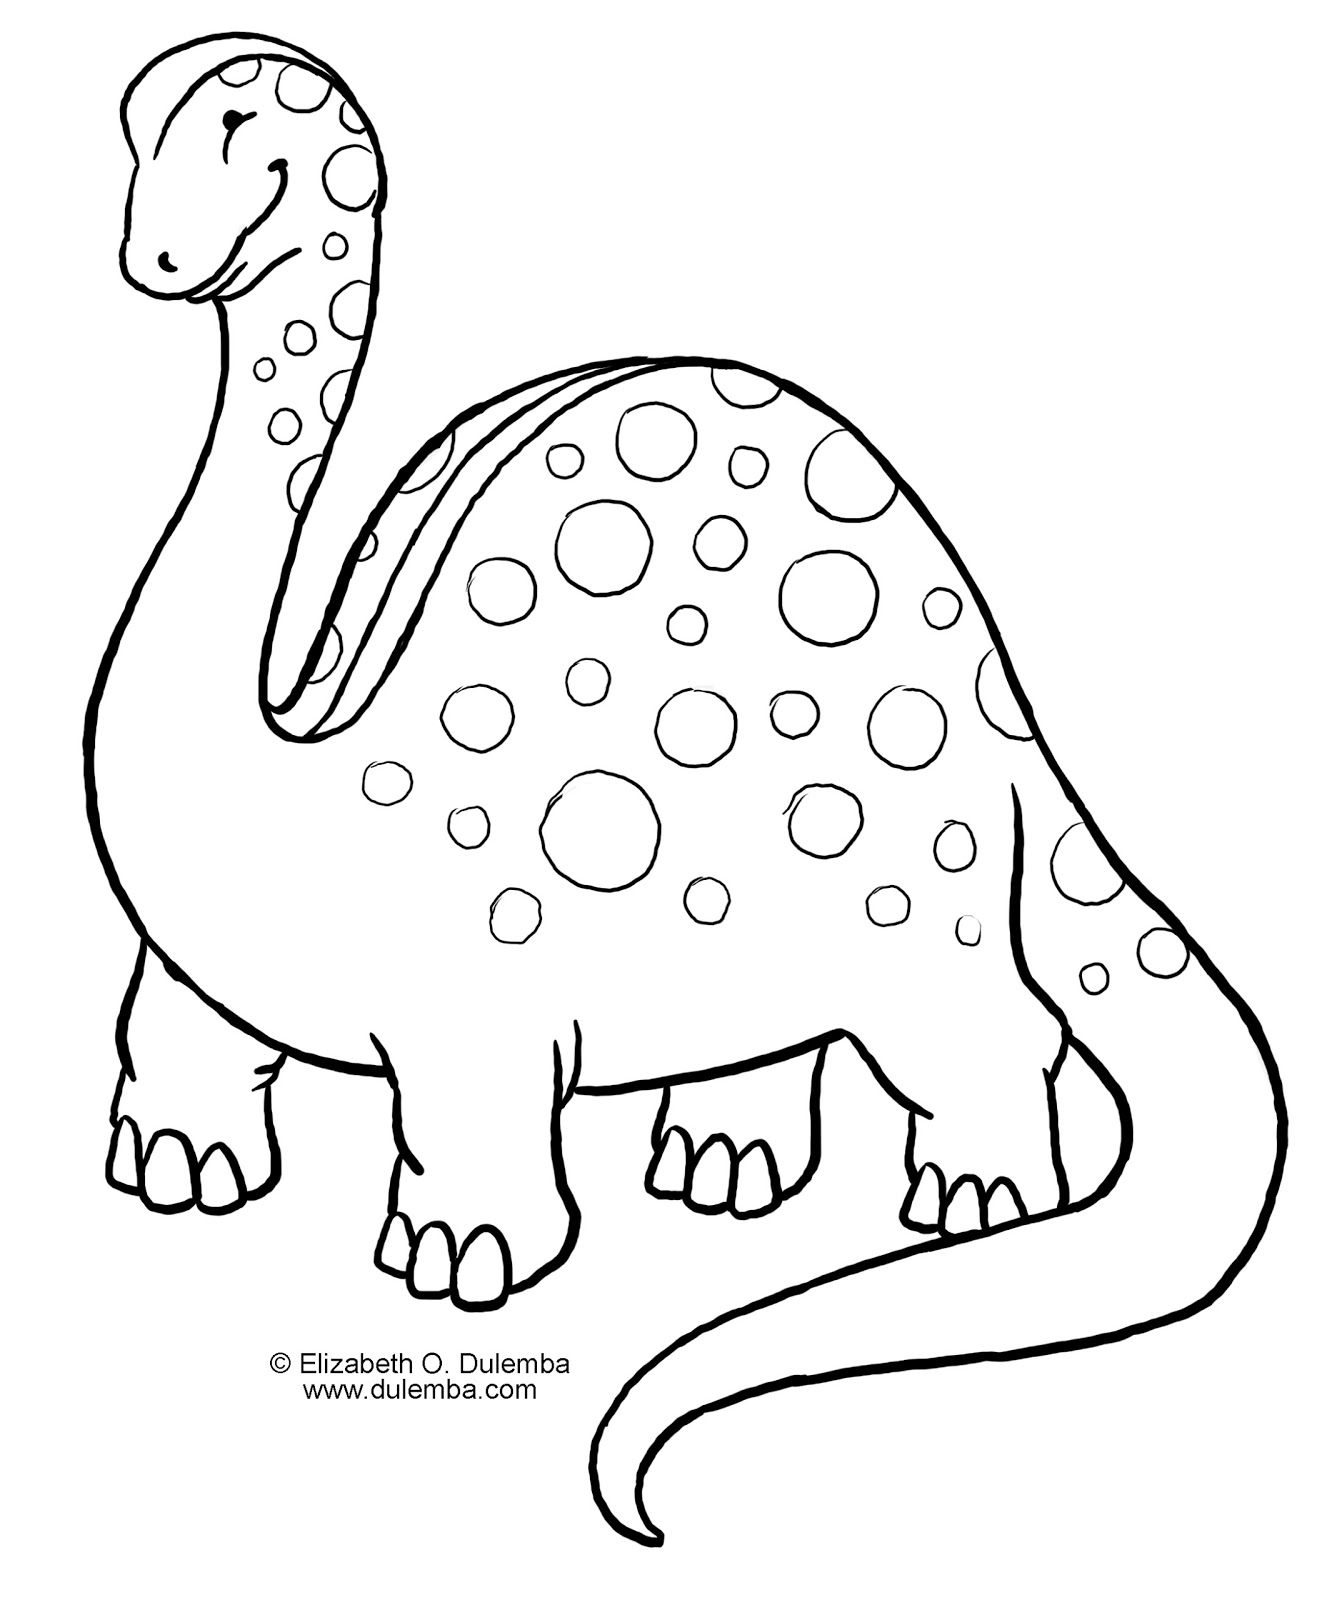 Download coloring: Dinosaur coloring pages